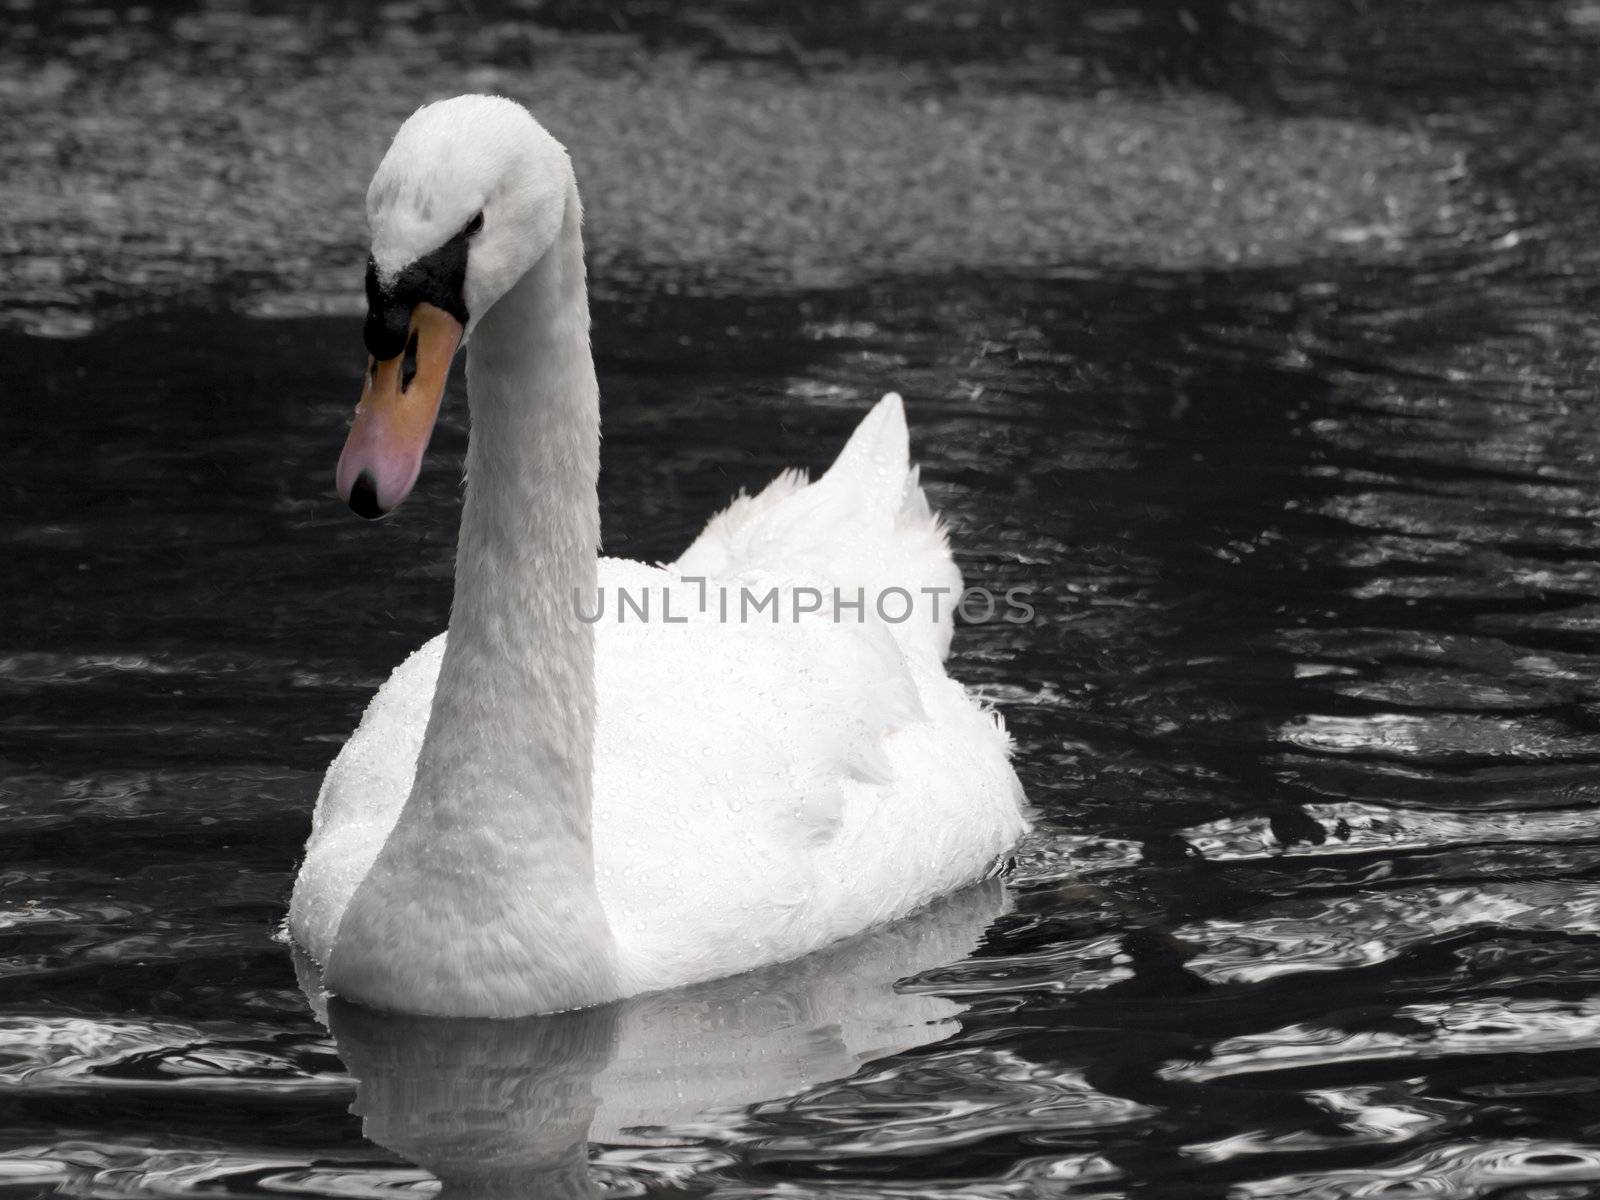 A beautiful swan or cygnus gliding across the water seemingly in deep thought